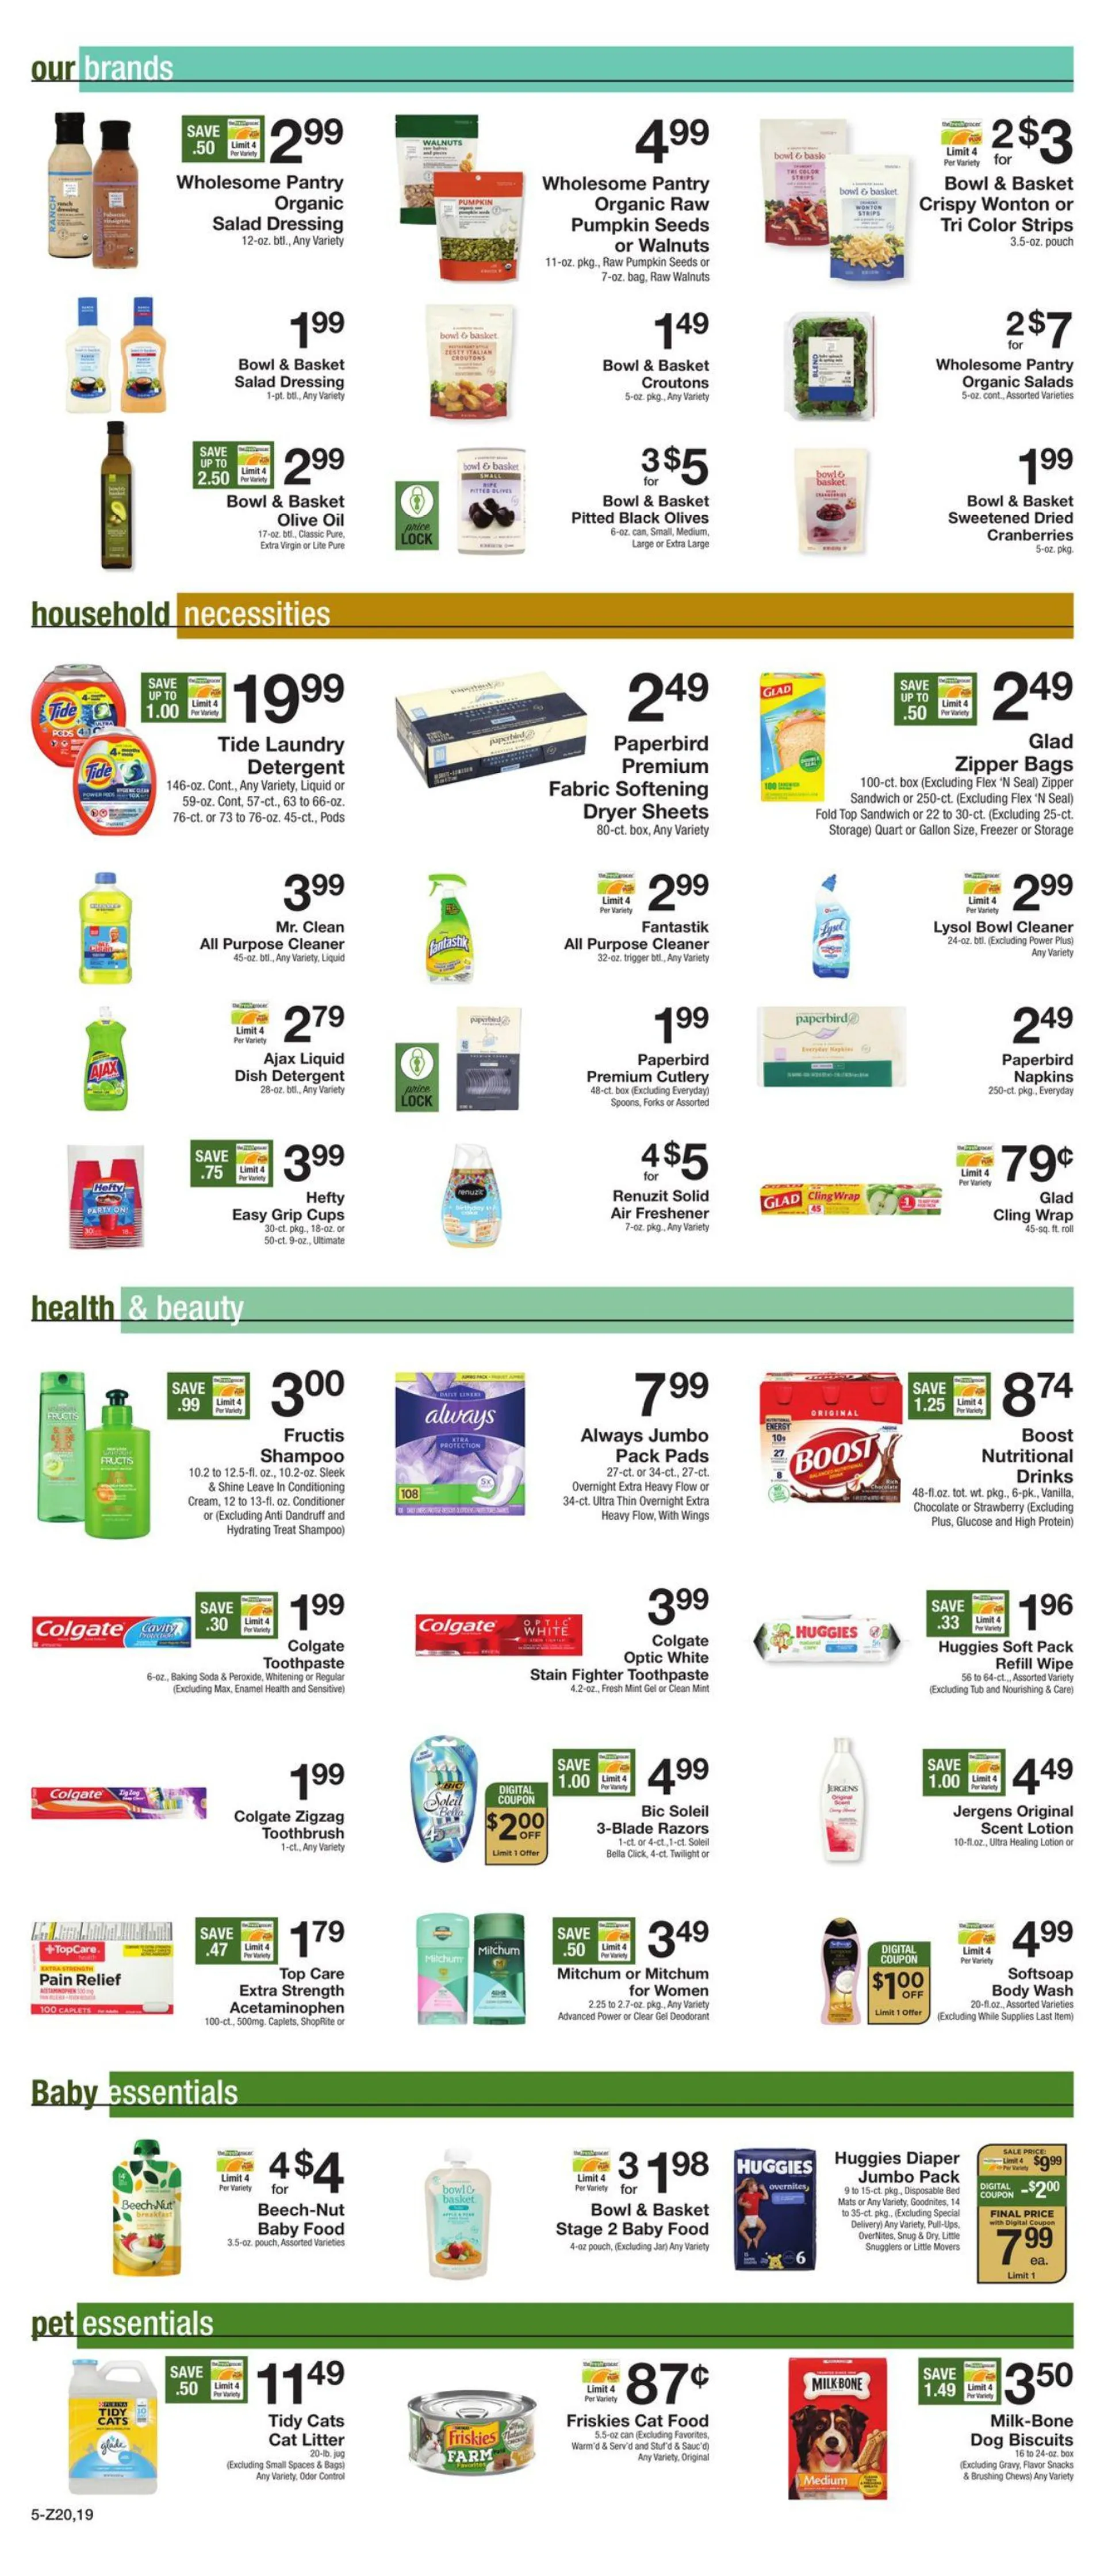 Gerritys Supermarkets Current weekly ad - 5